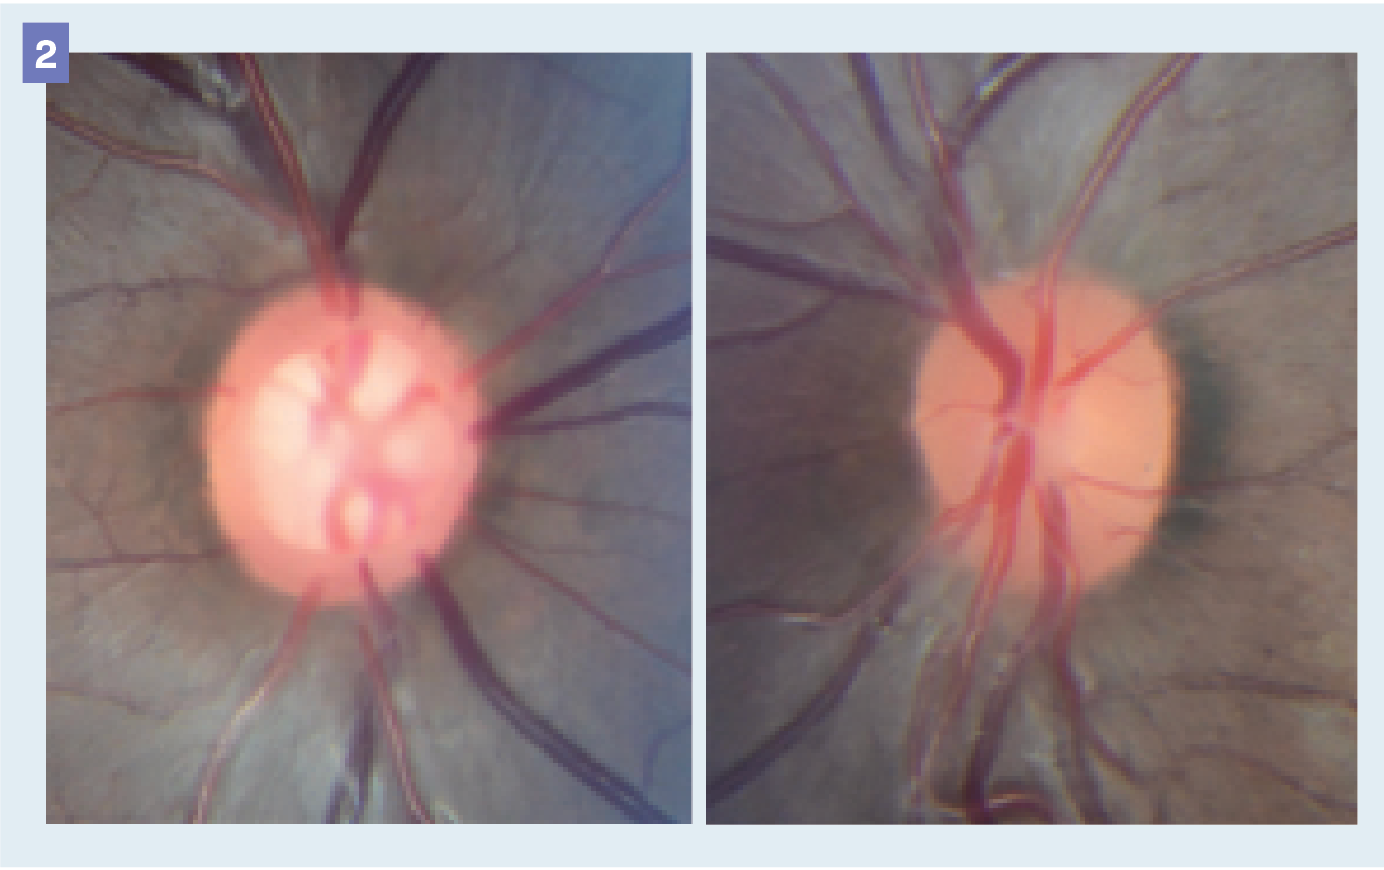 Figure 2. Pediatric Uveitic Glaucoma. Uveitic glaucoma showing asymmetric cup to disc ratio in a 13-year-old female patient. (Images courtesy of Samantha Rosen, OD)